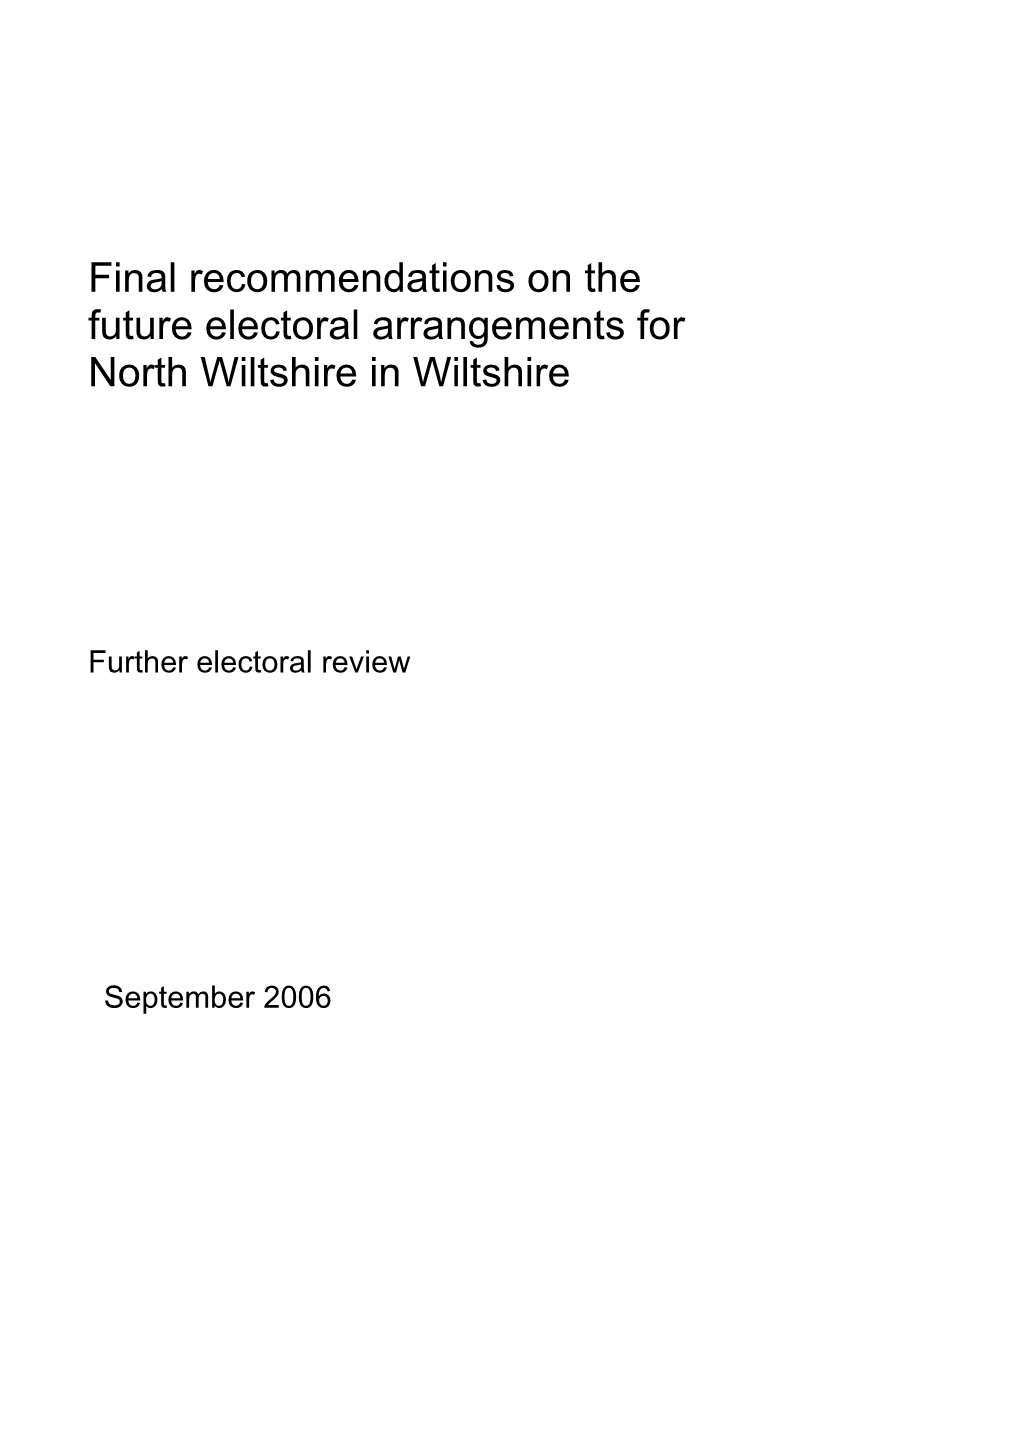 Final Recommendations on the Future Electoral Arrangements for North Wiltshire in Wiltshire